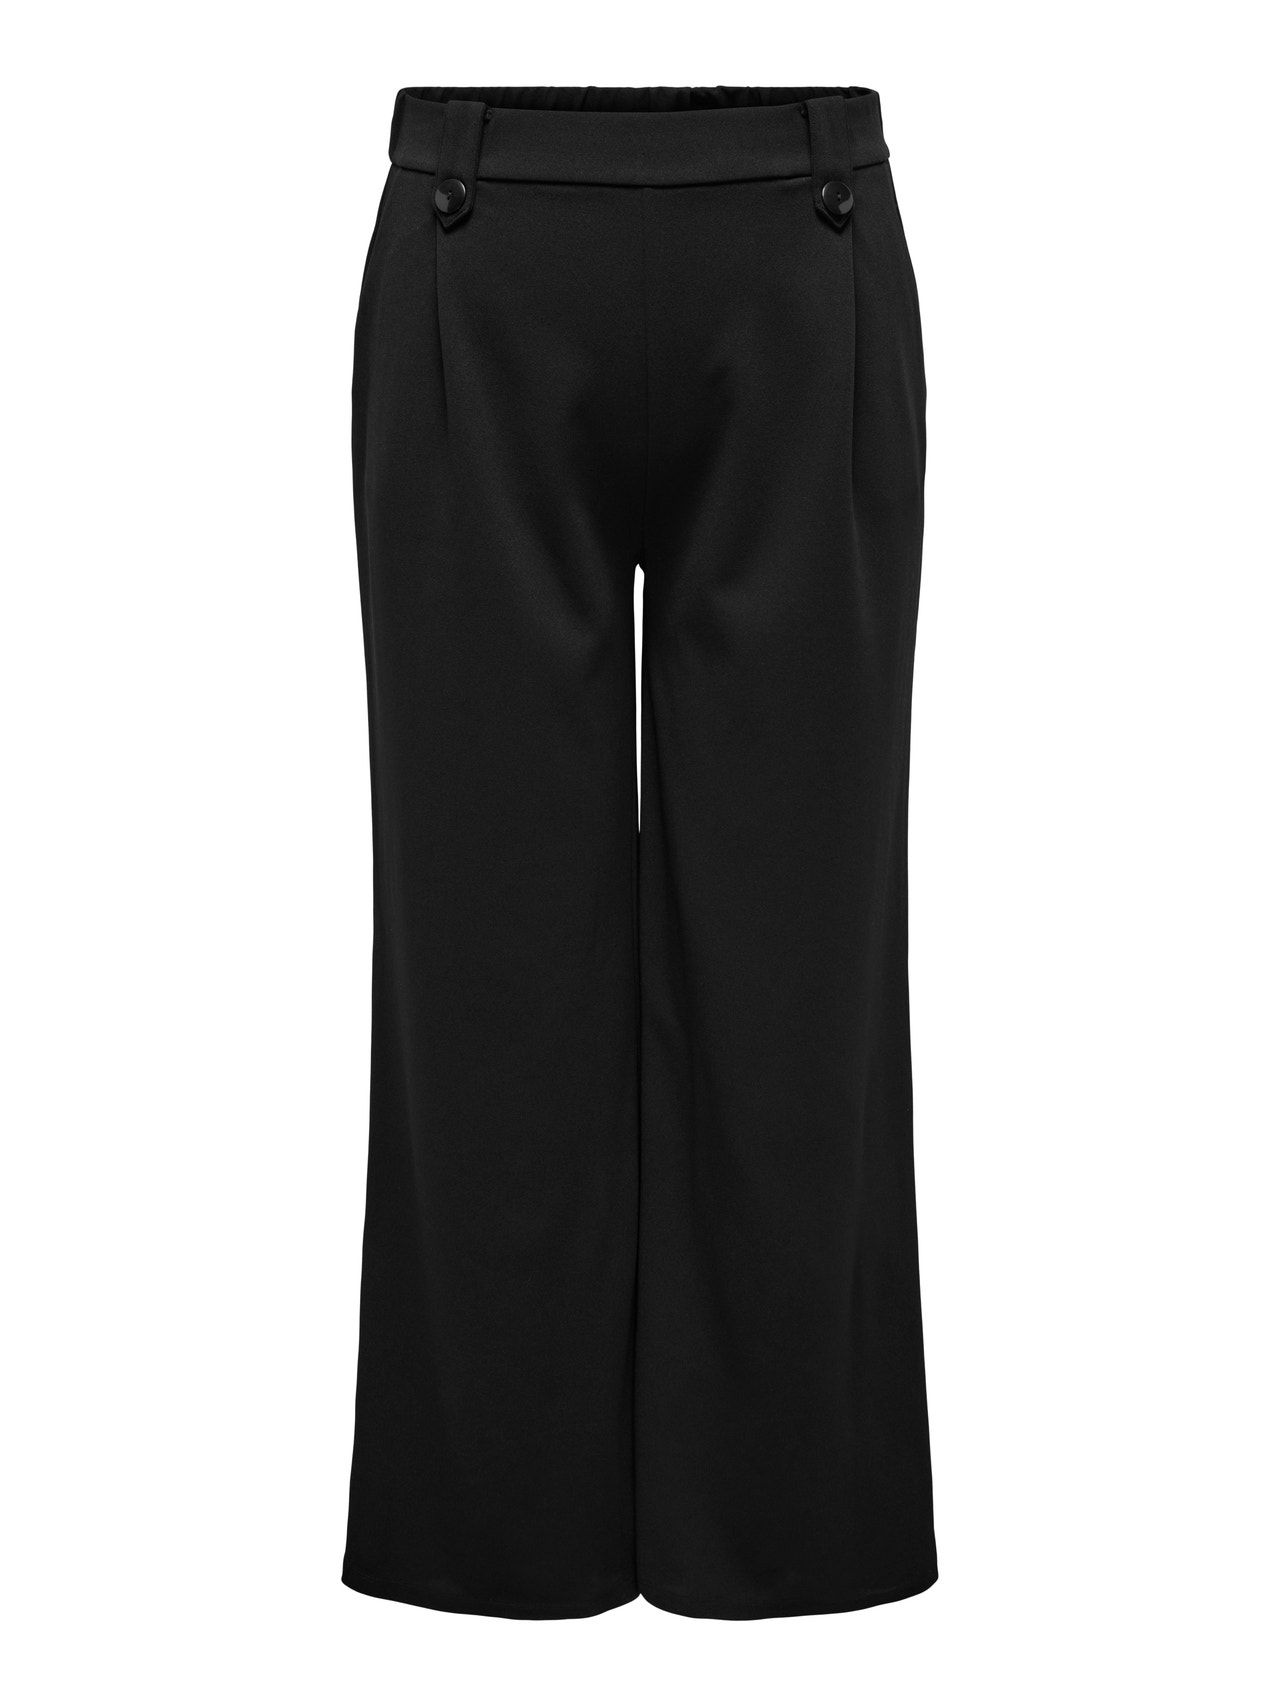 ONLY Regular Fit Curve Trousers -Black - 15293196